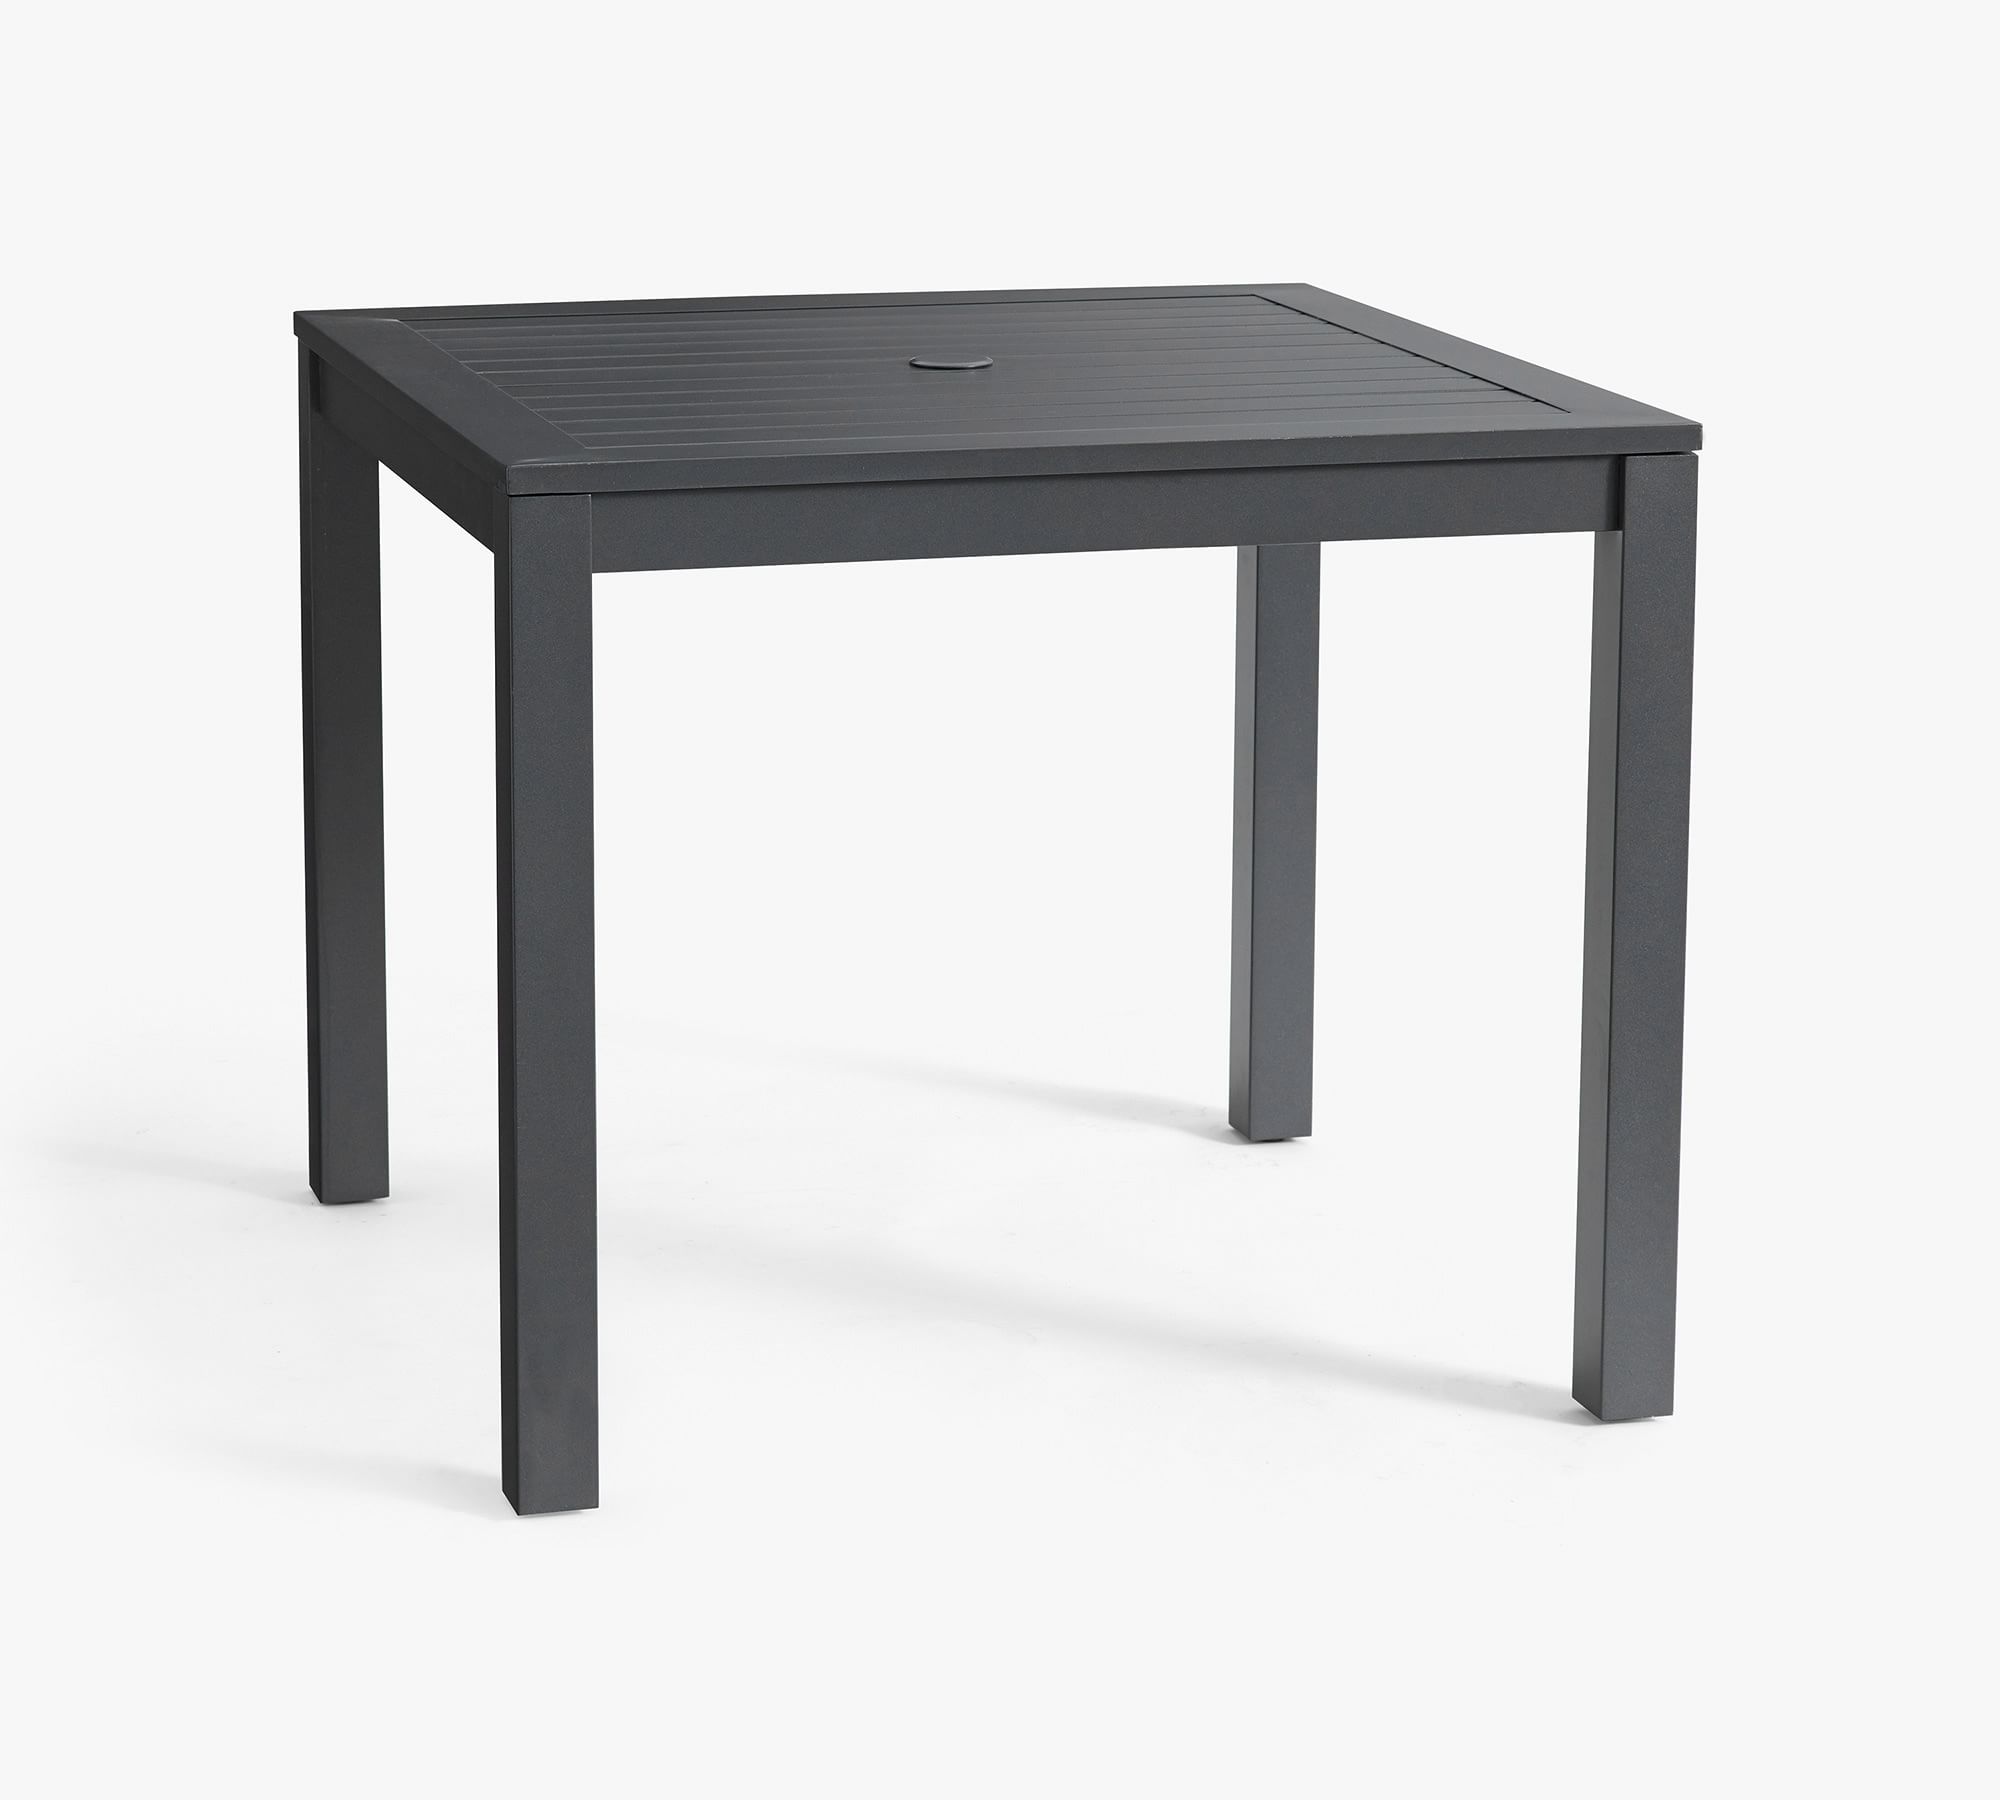 Indio Metal Square Outdoor Dining Table (36")